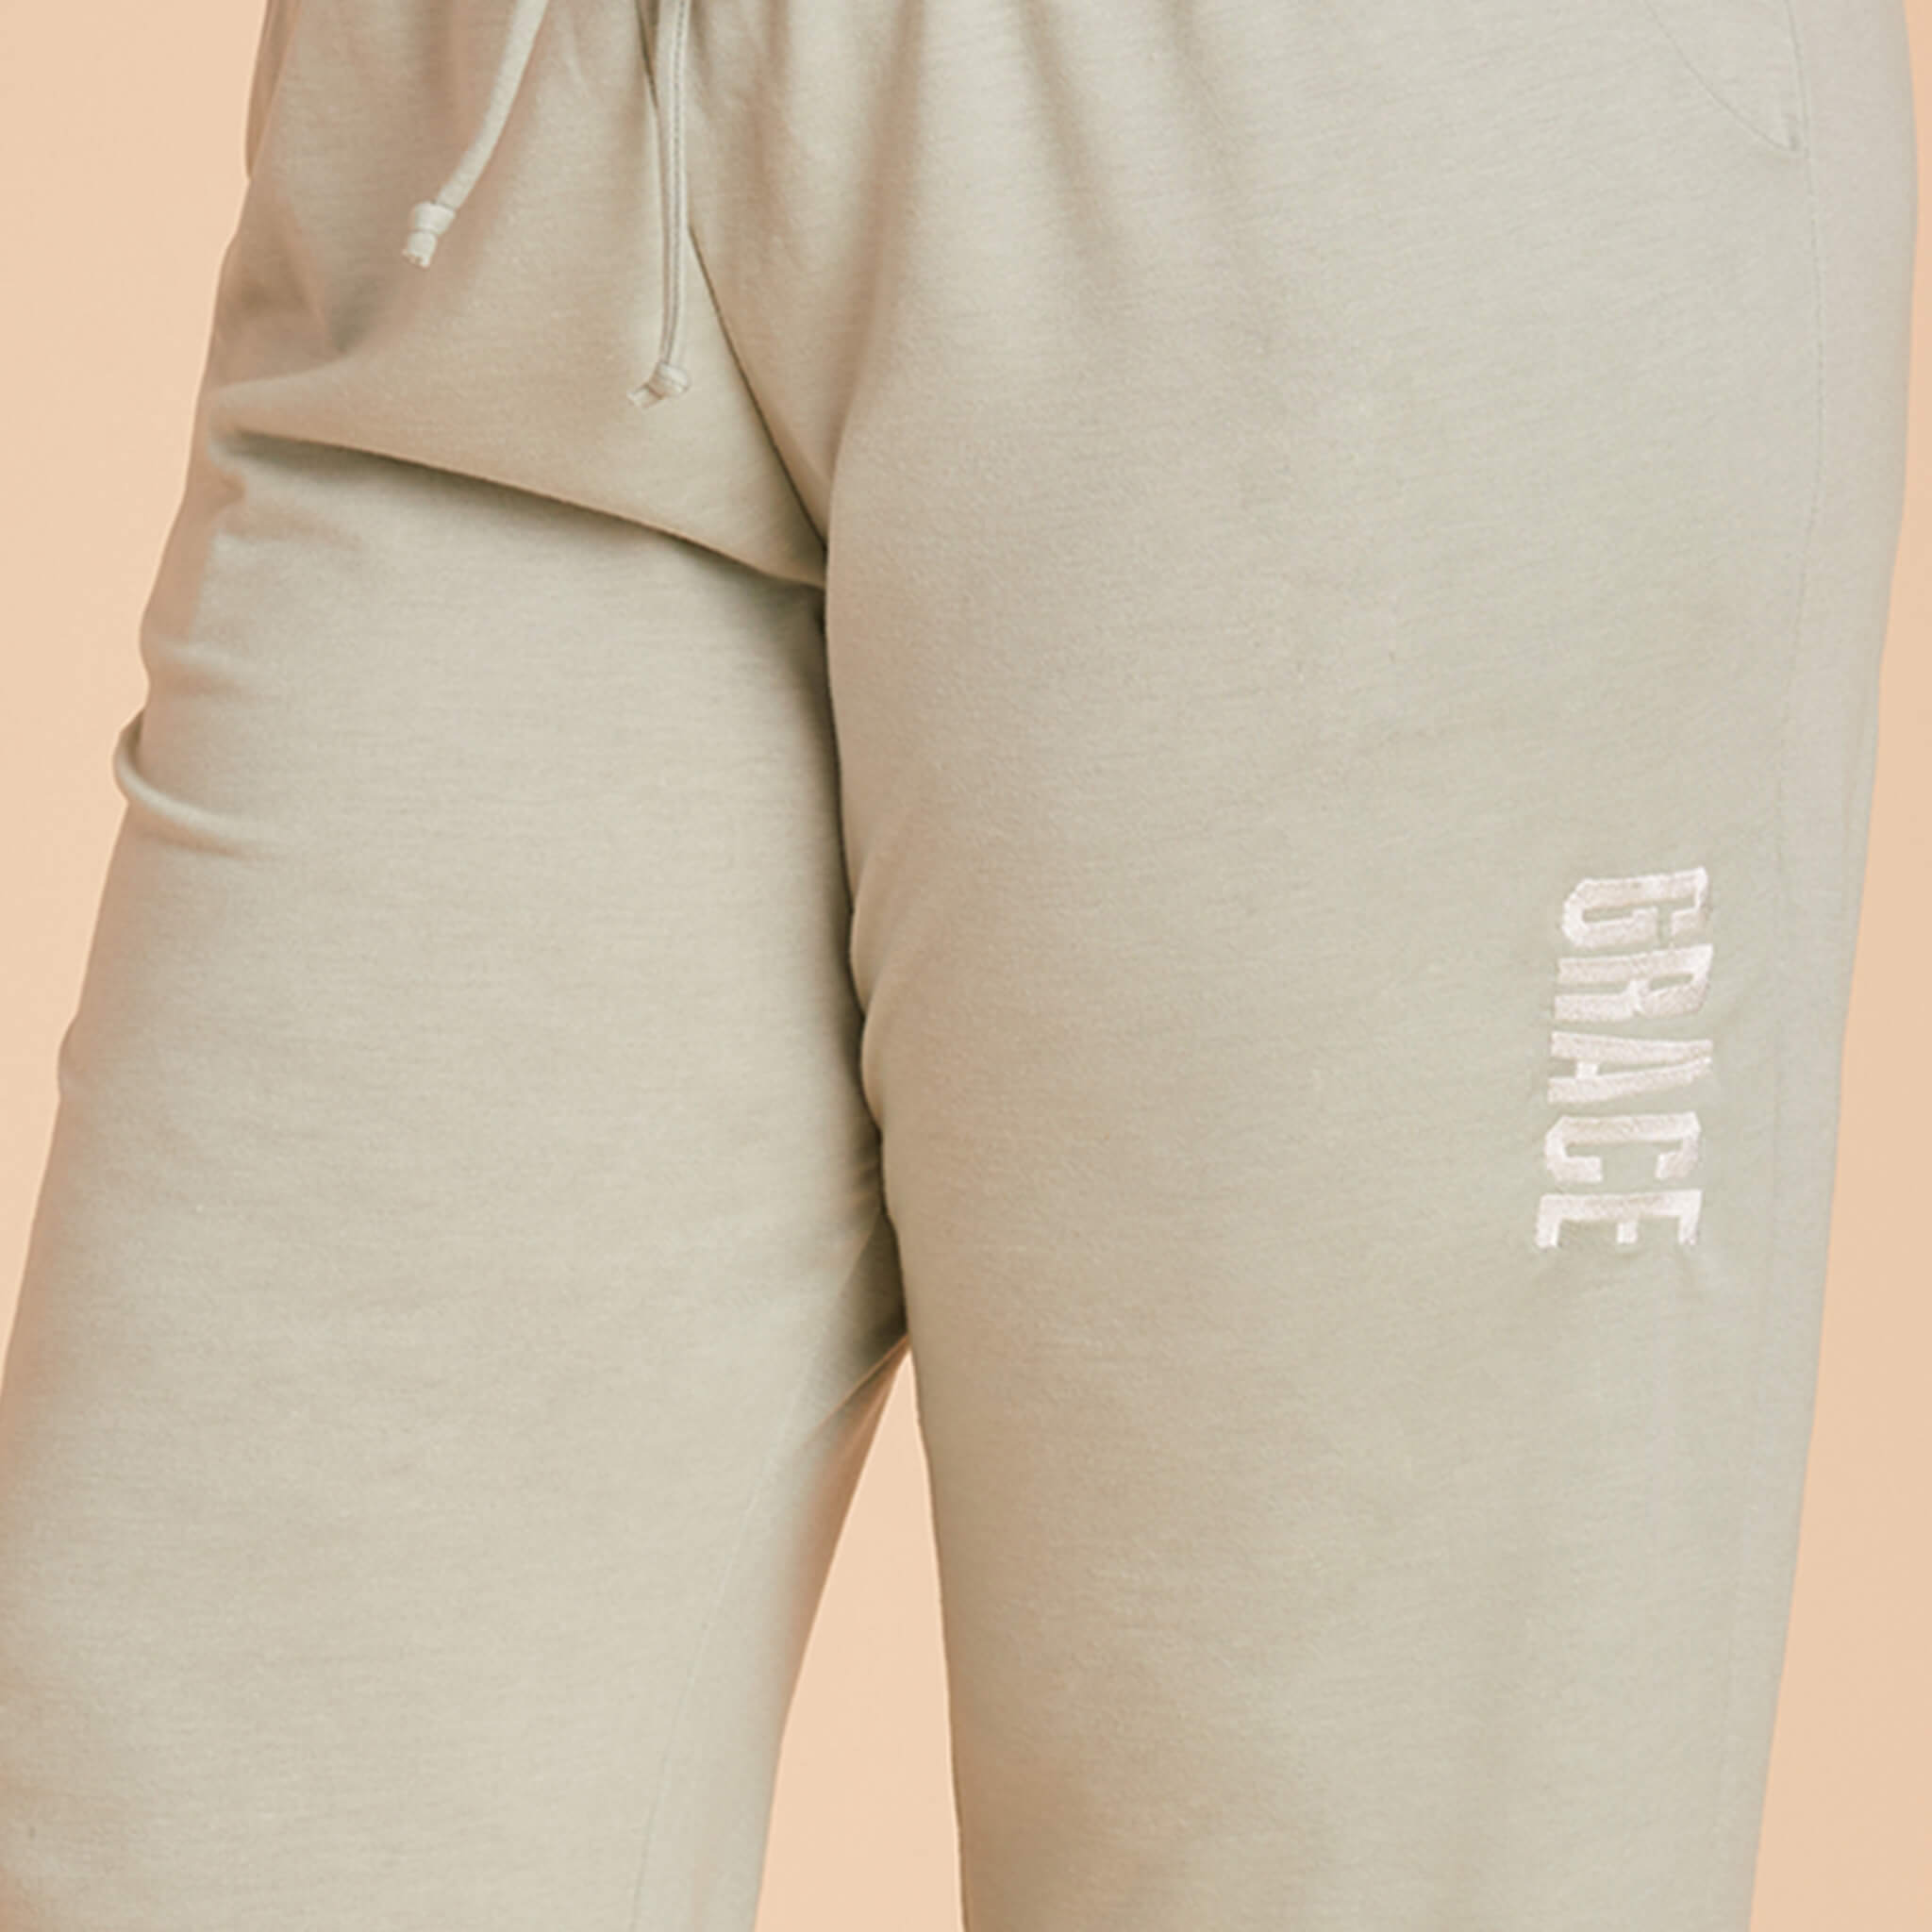 Plus Size sweatpants in Sage Light Green with personalization